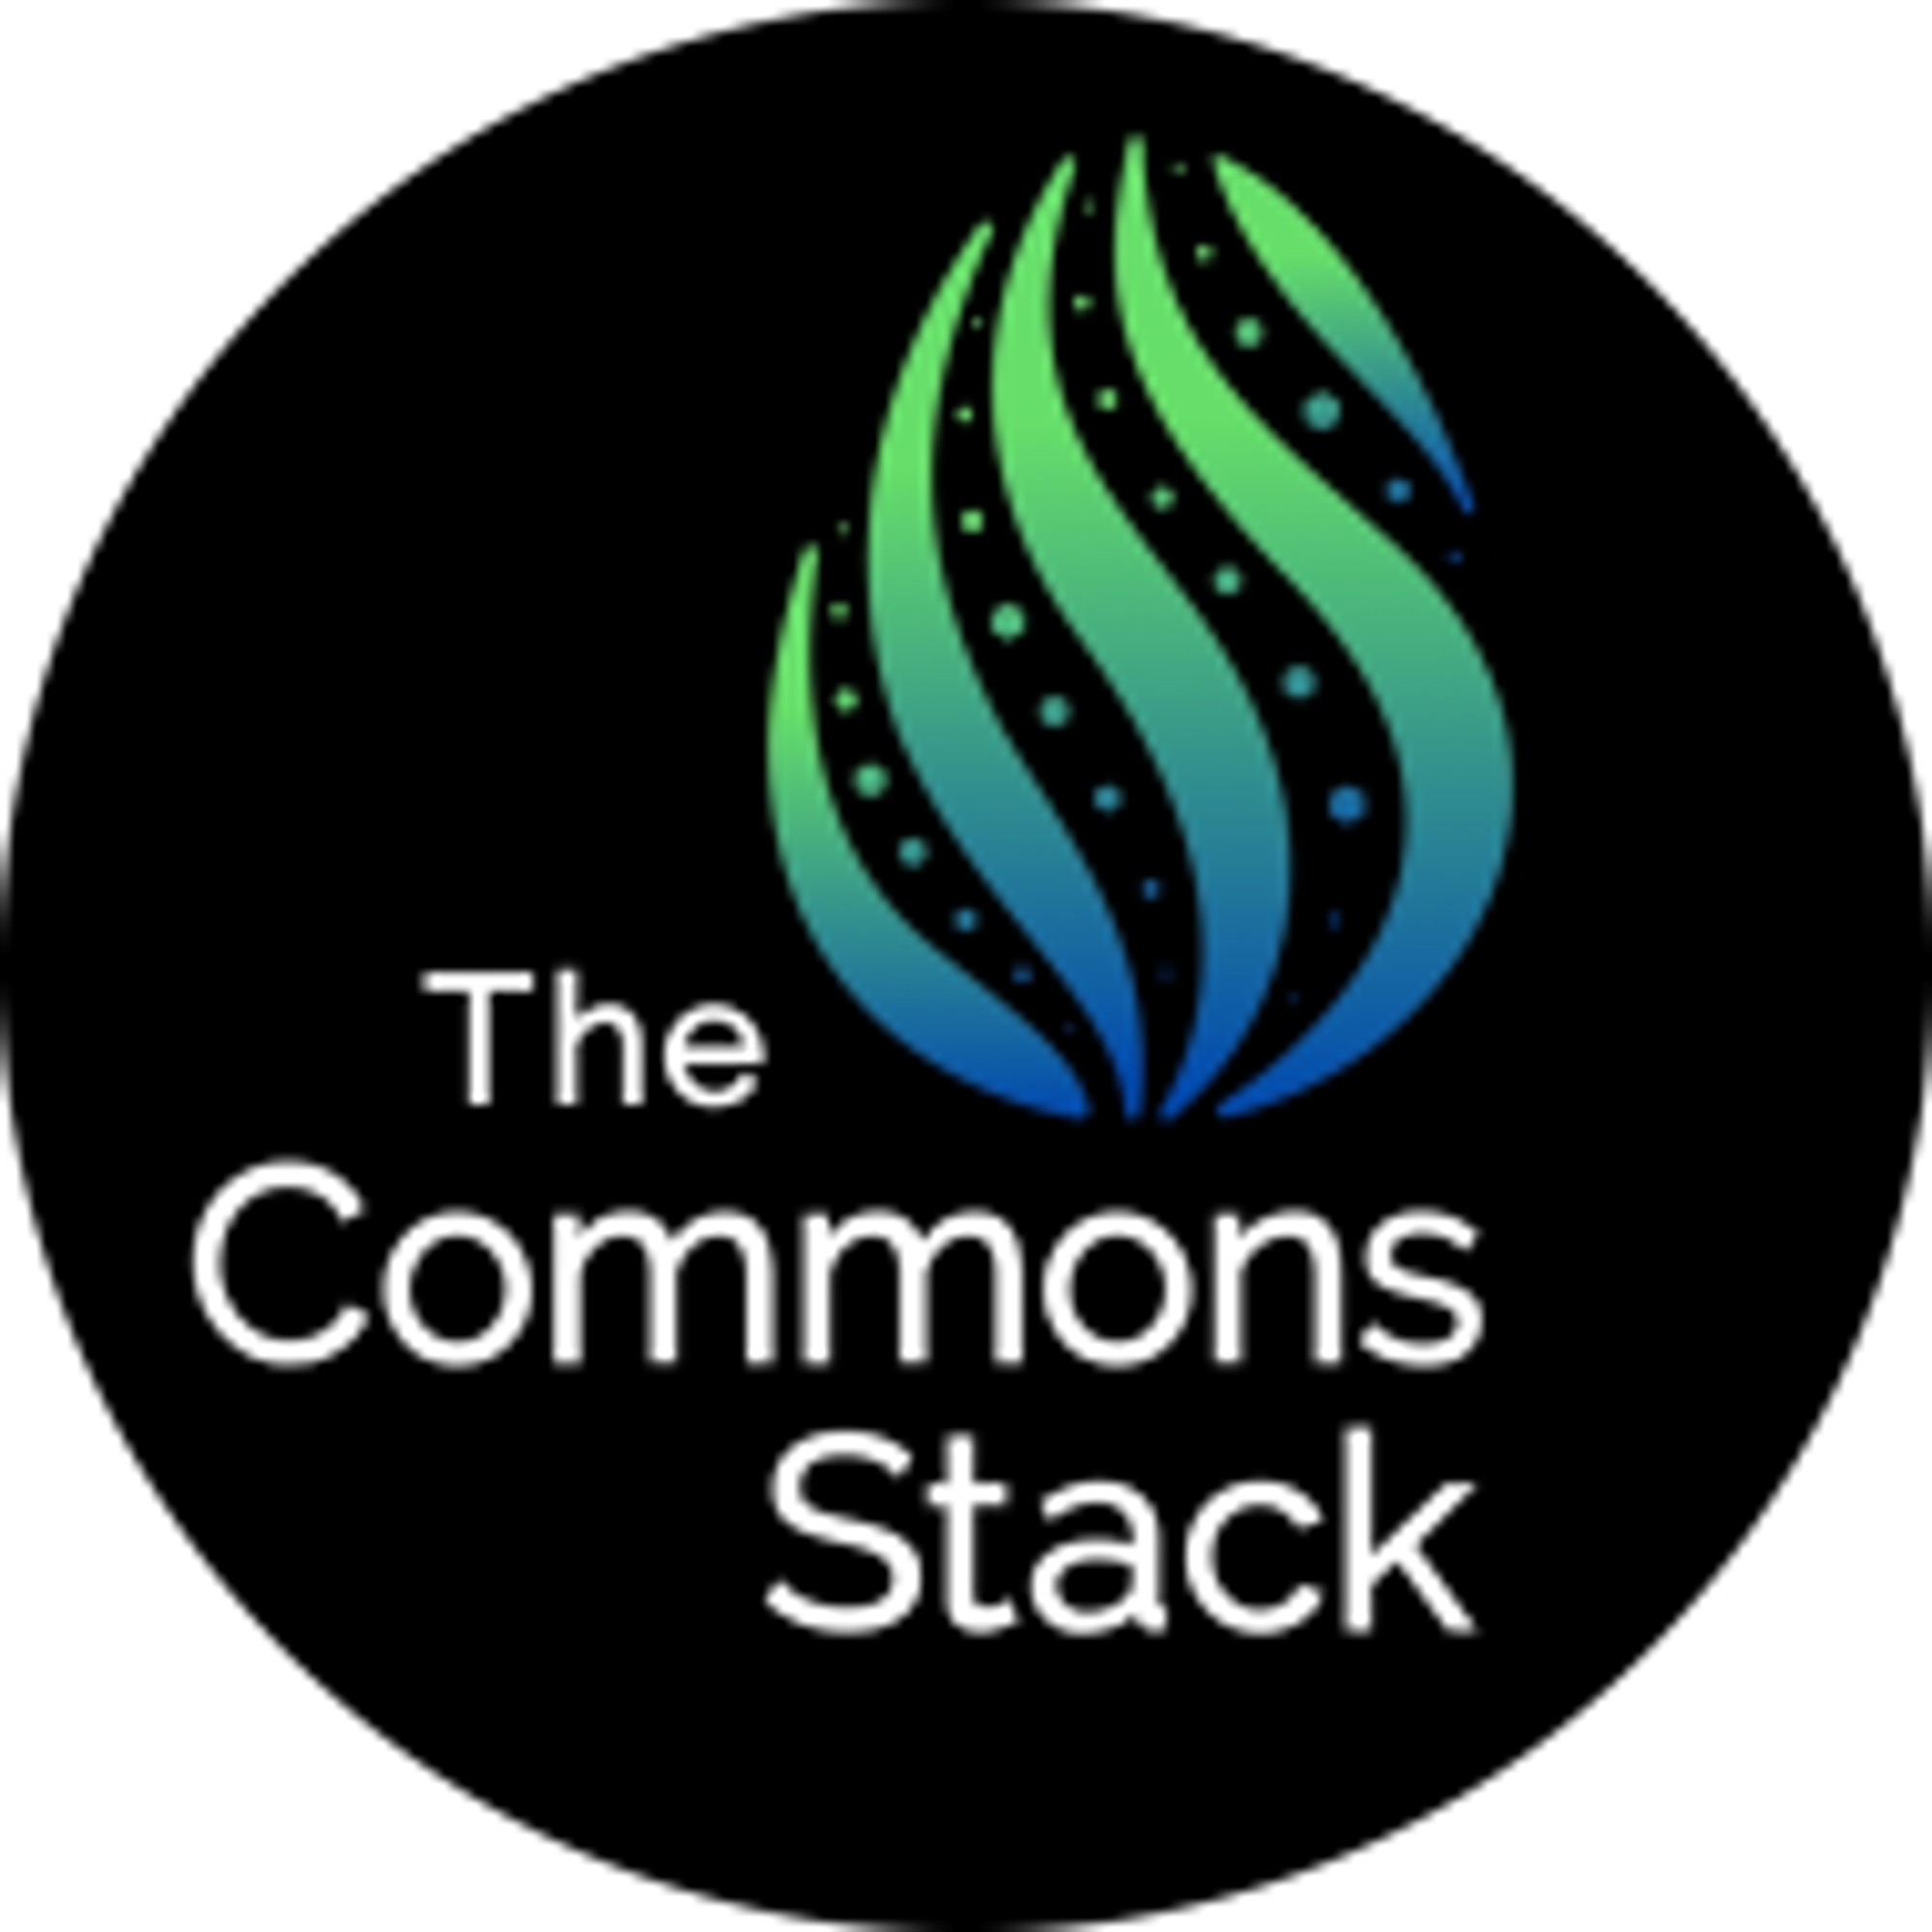 Commons Stack